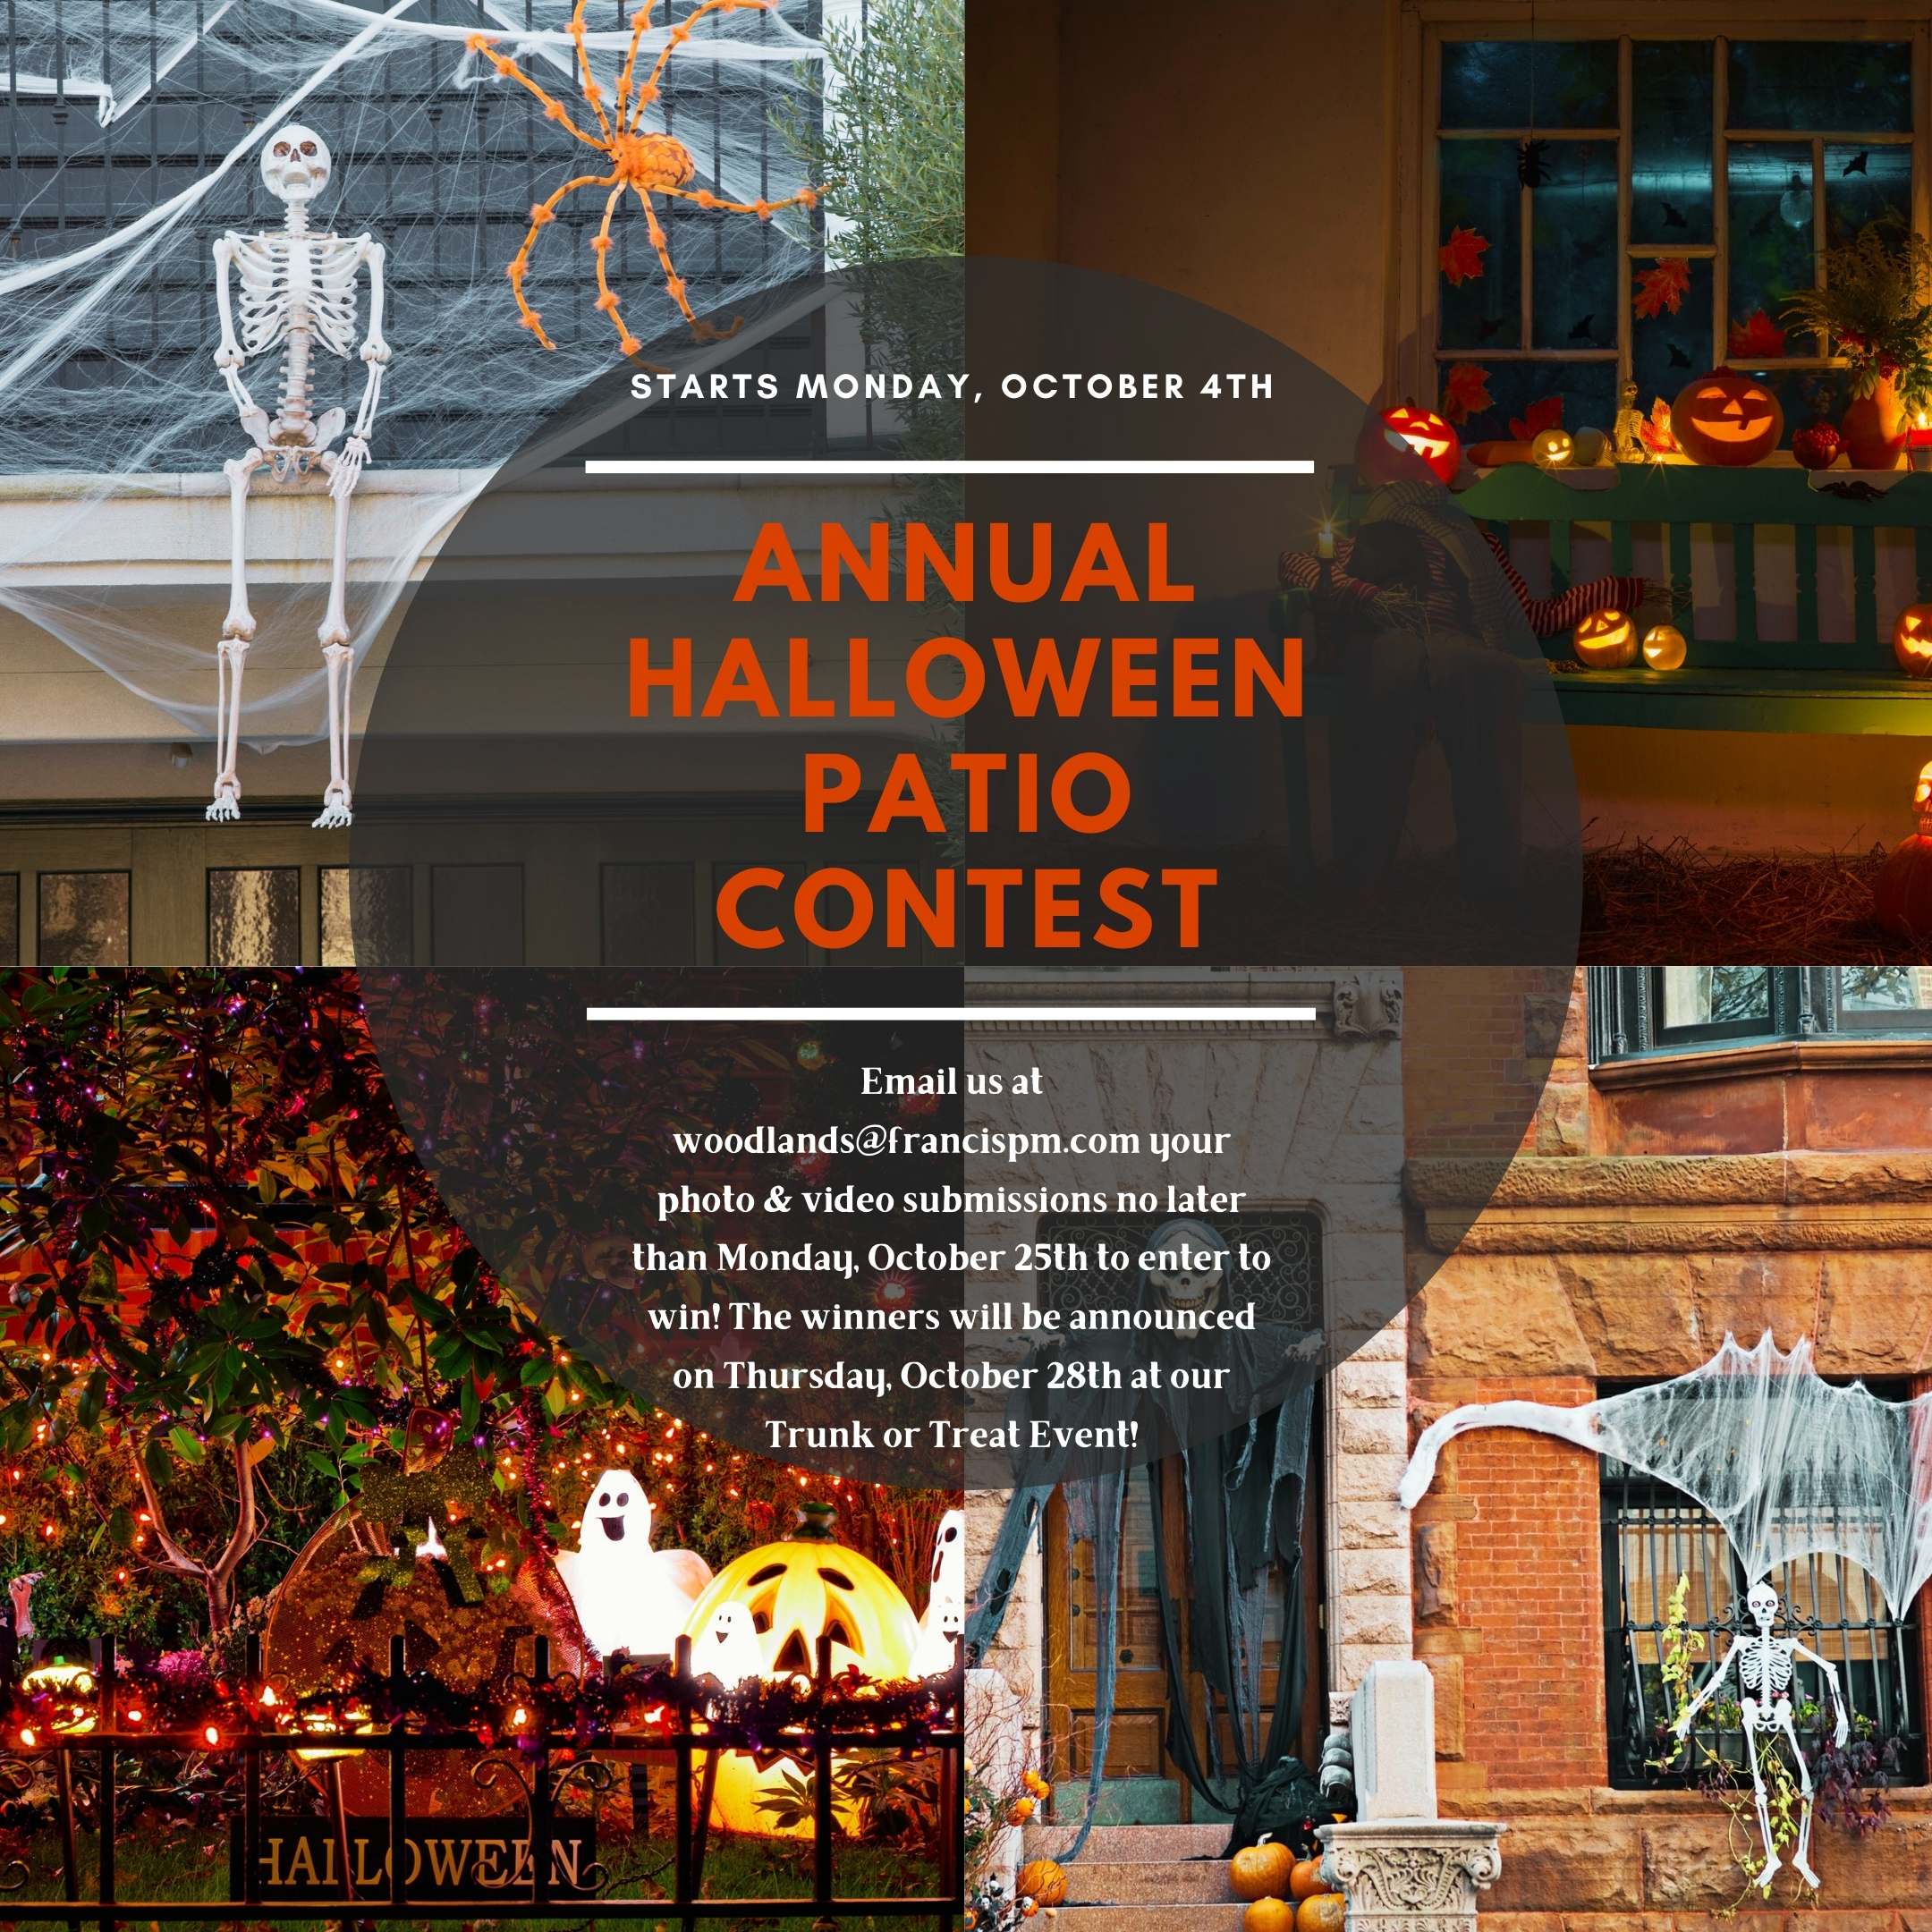 Annual Halloween patio contest at apartments in The Woodlands TX.